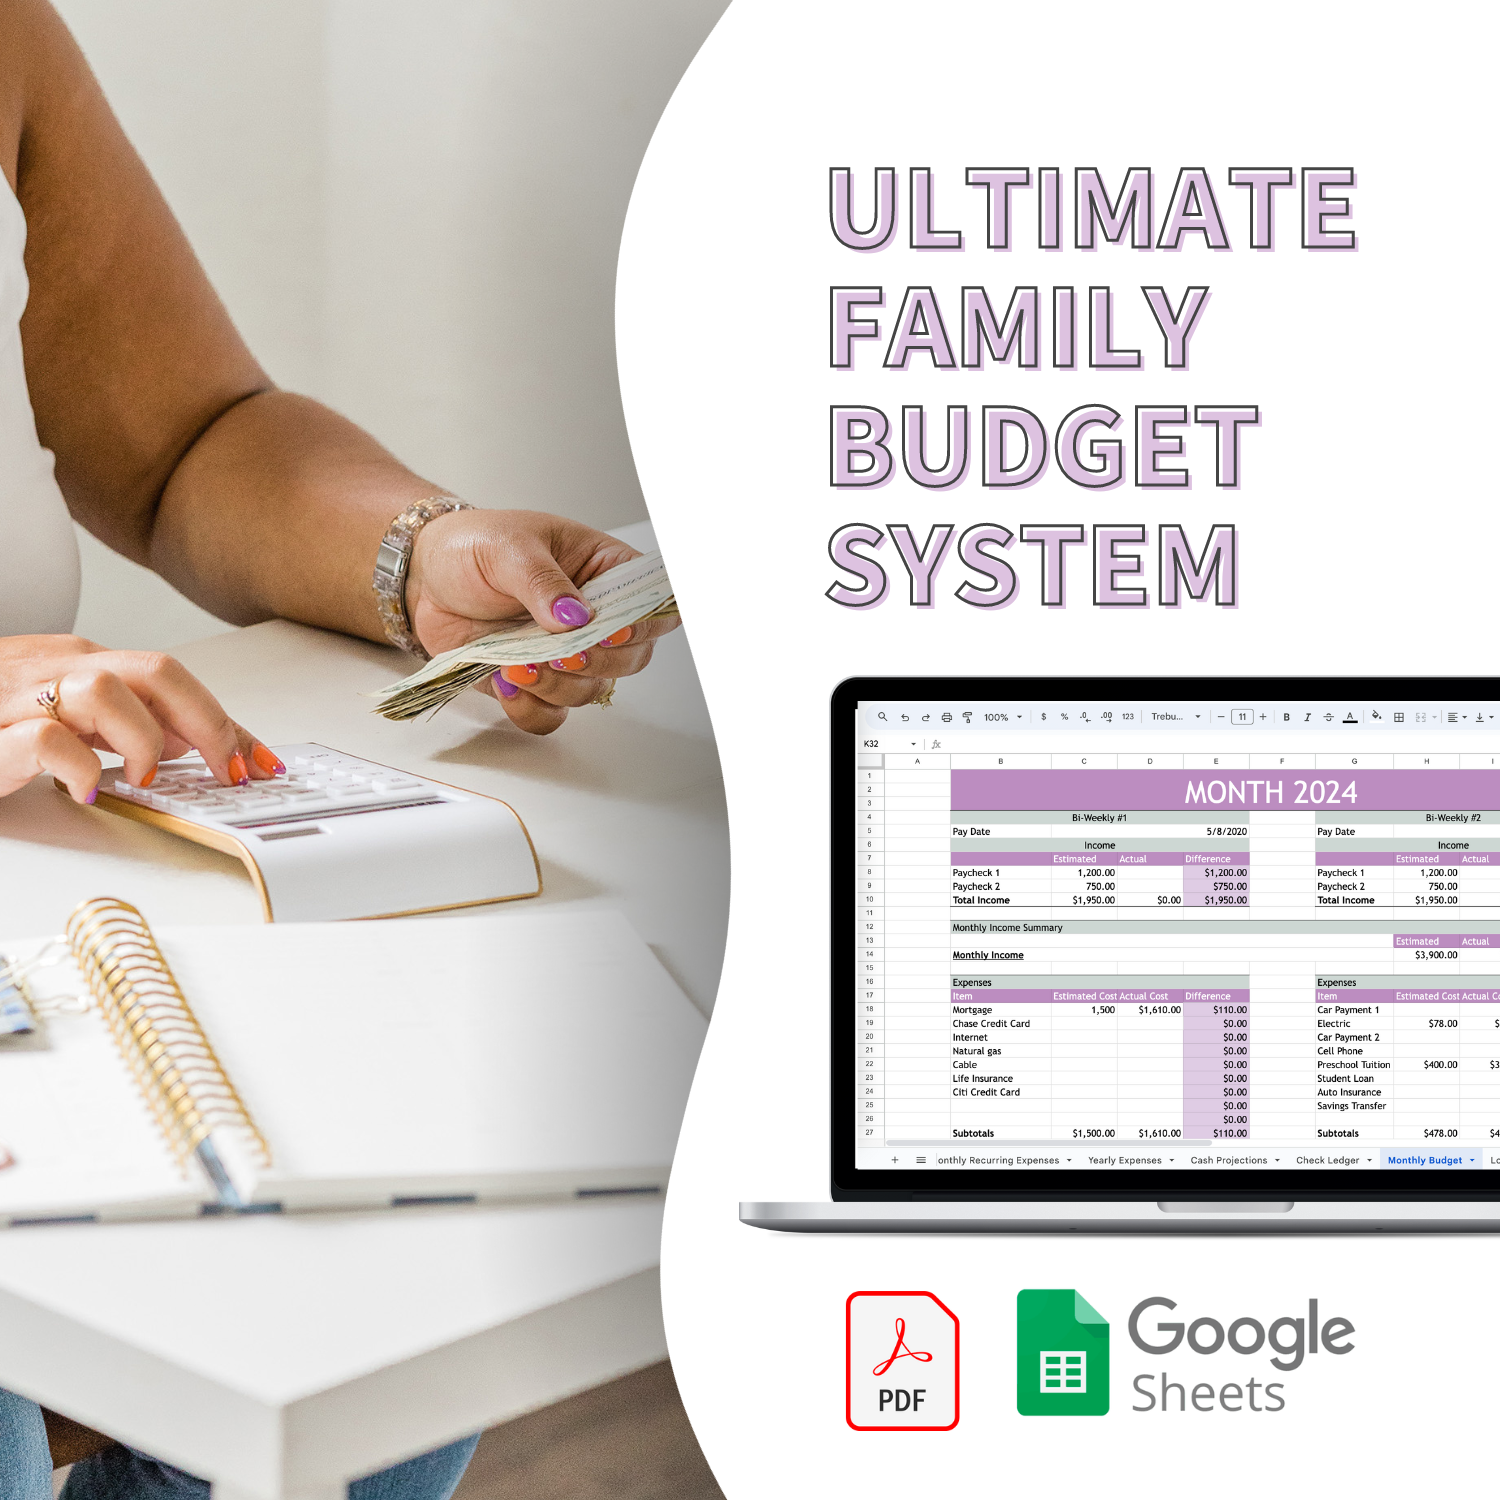 ultimate family budget system includes the best spreadsheets and templates for managing your family finances